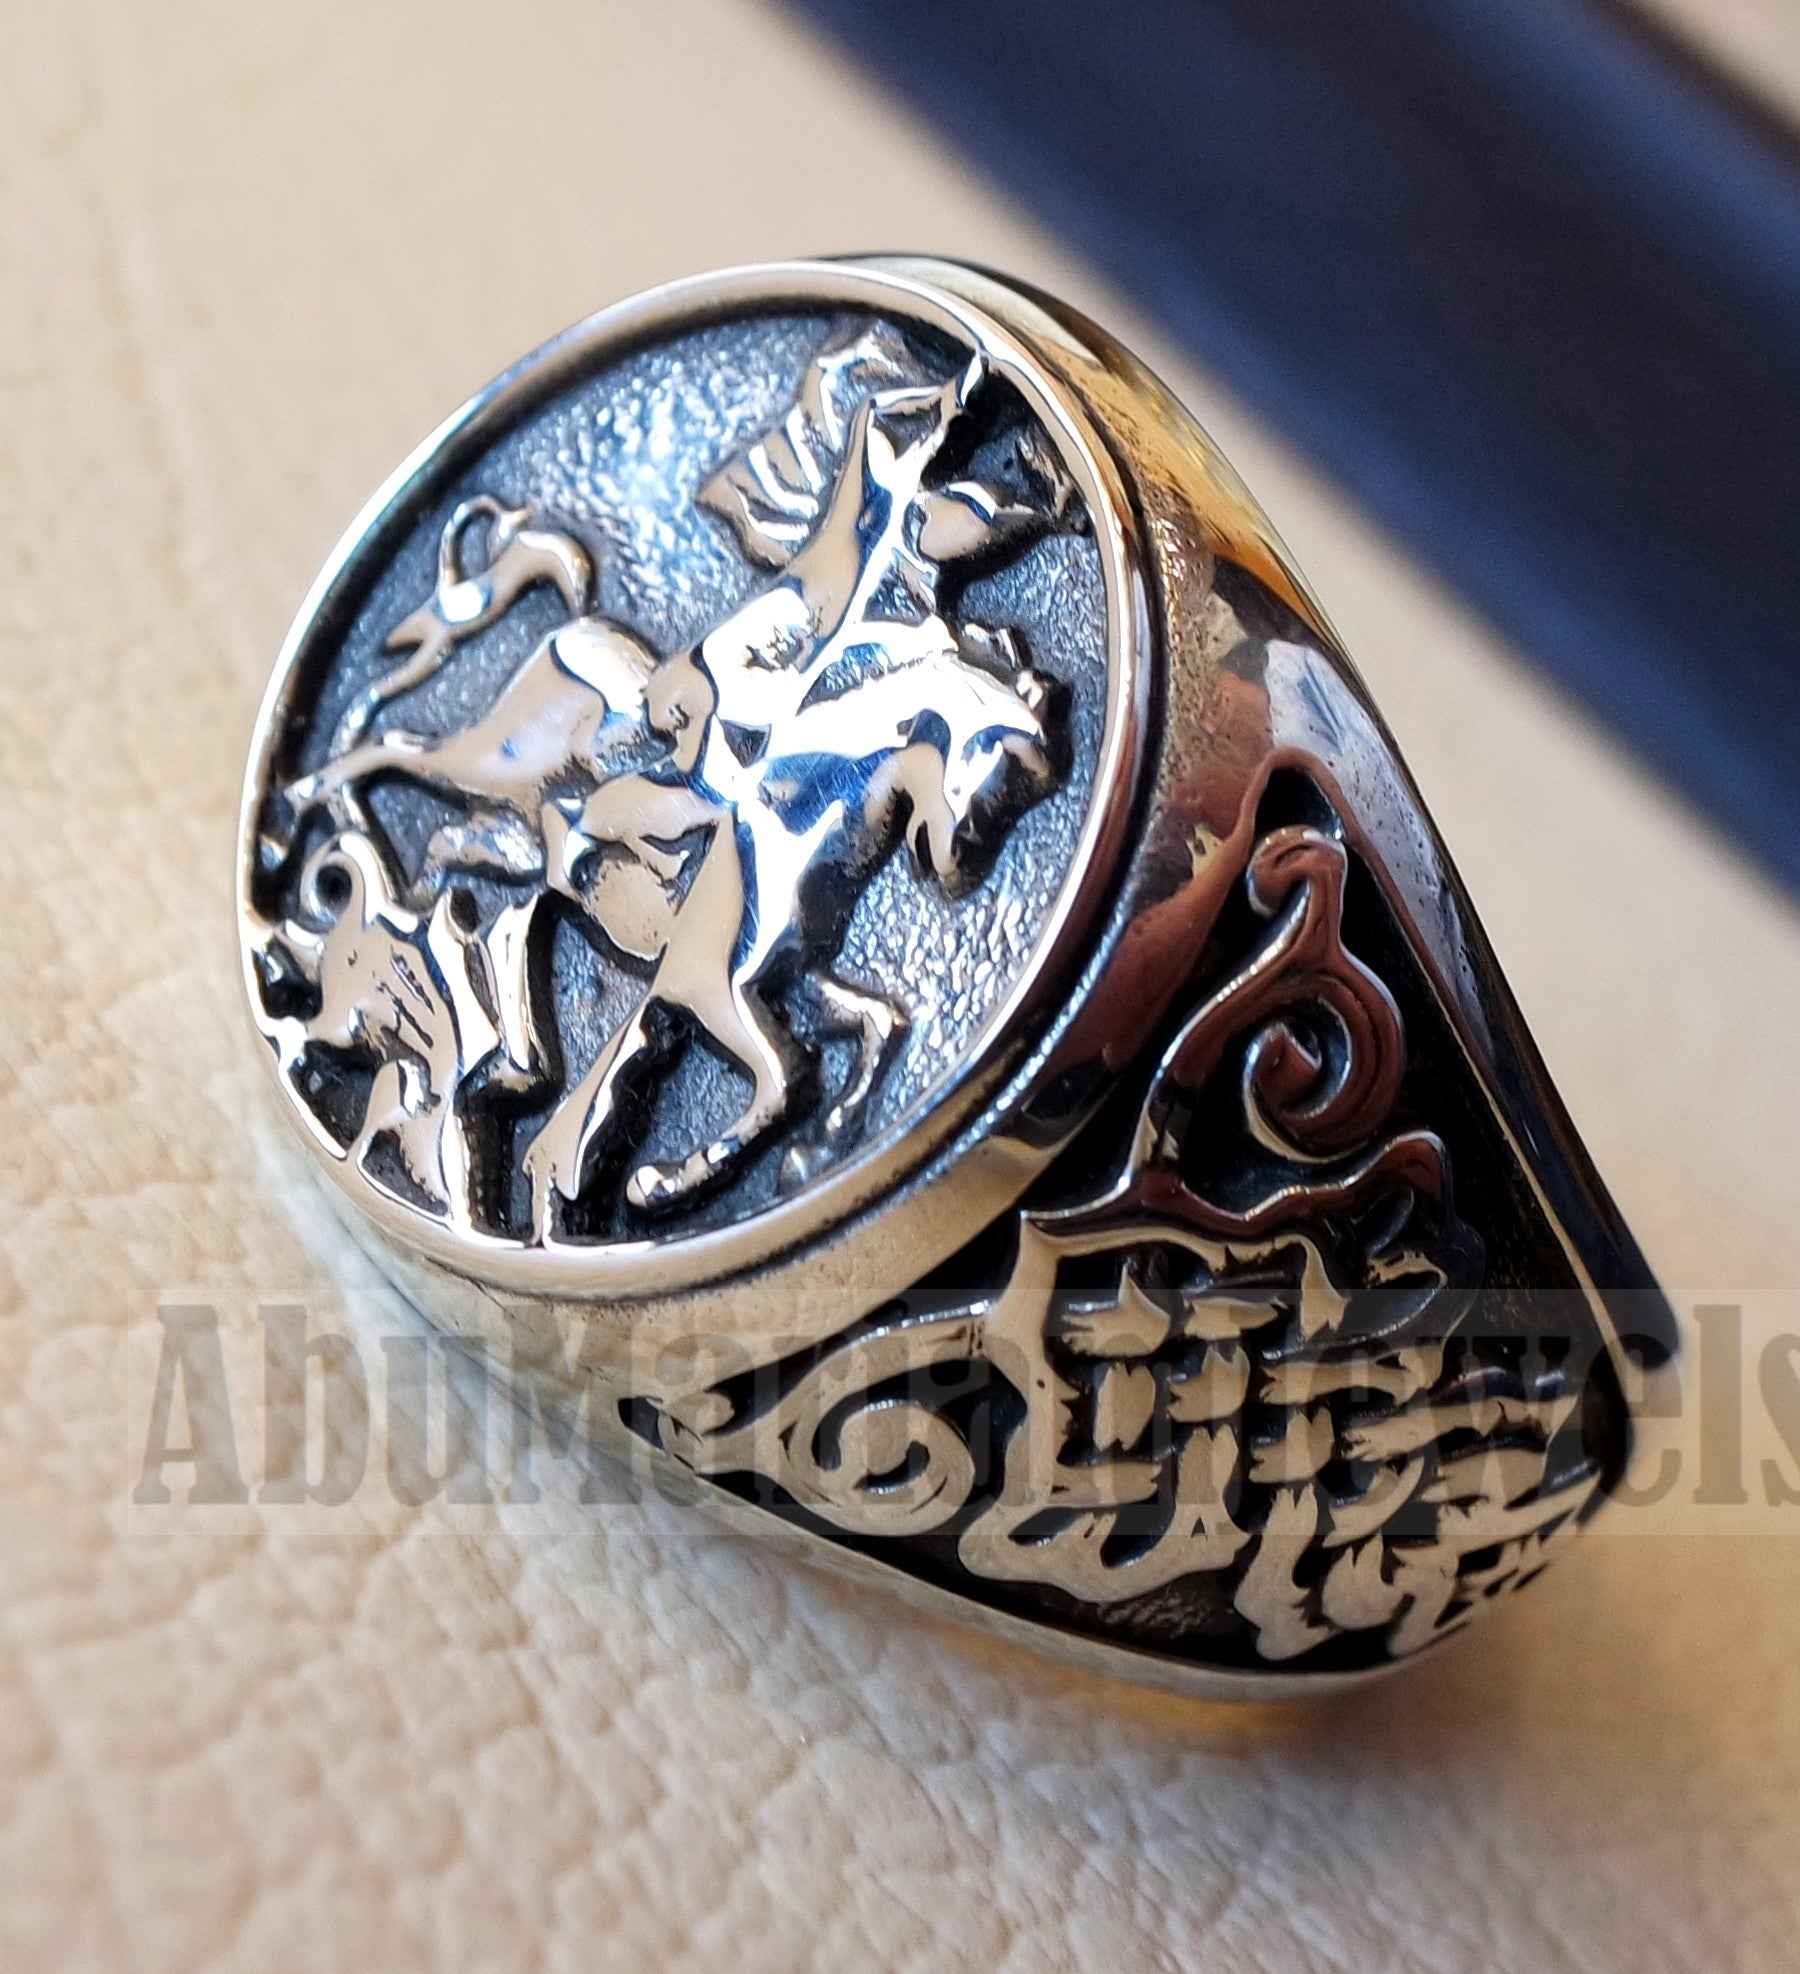 St George's and the dragon heavy man ring round sterling silver 925 historical religious Greek Orthodox Christian all sizes jewelry